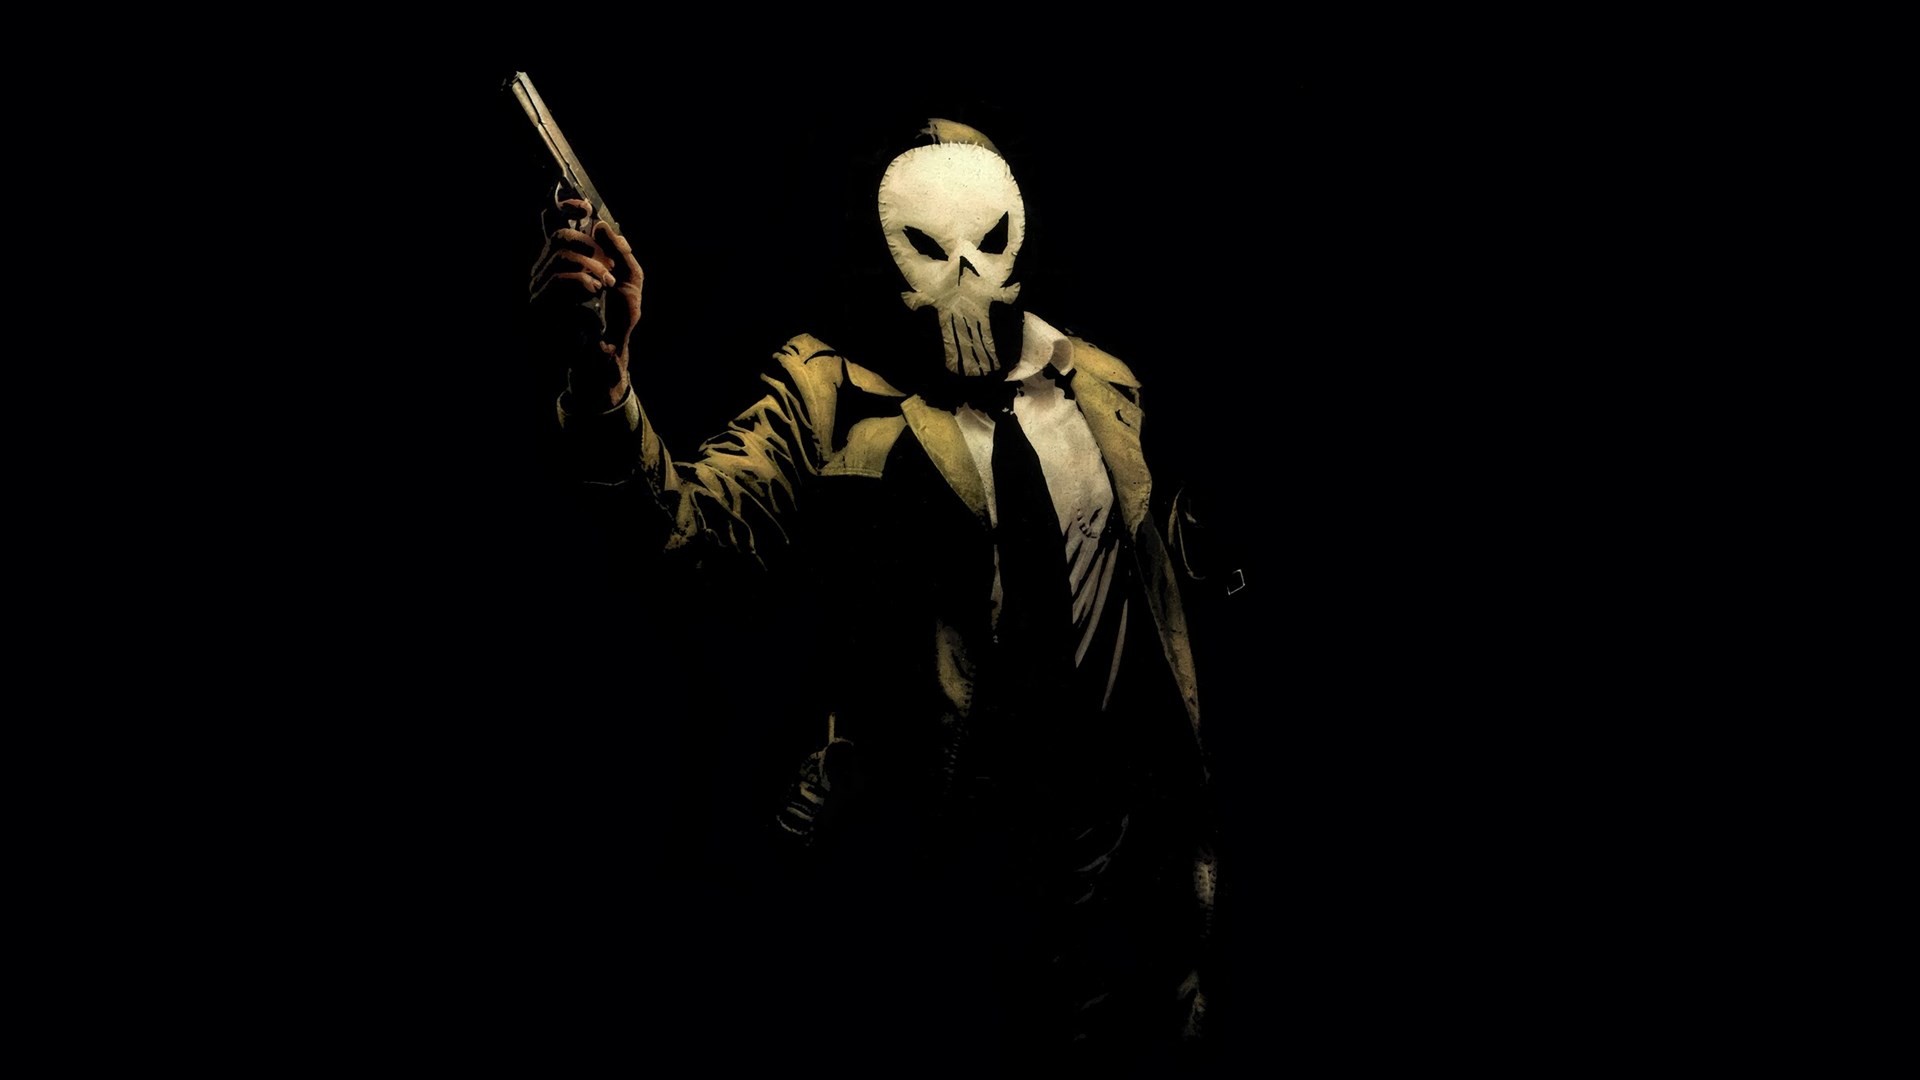 1920x1080 he Punisher Wallpapers The Punisher Widescreen Photos | HD Wallpapers |  Pinterest | Punisher, Hd wallpaper and Wallpaper